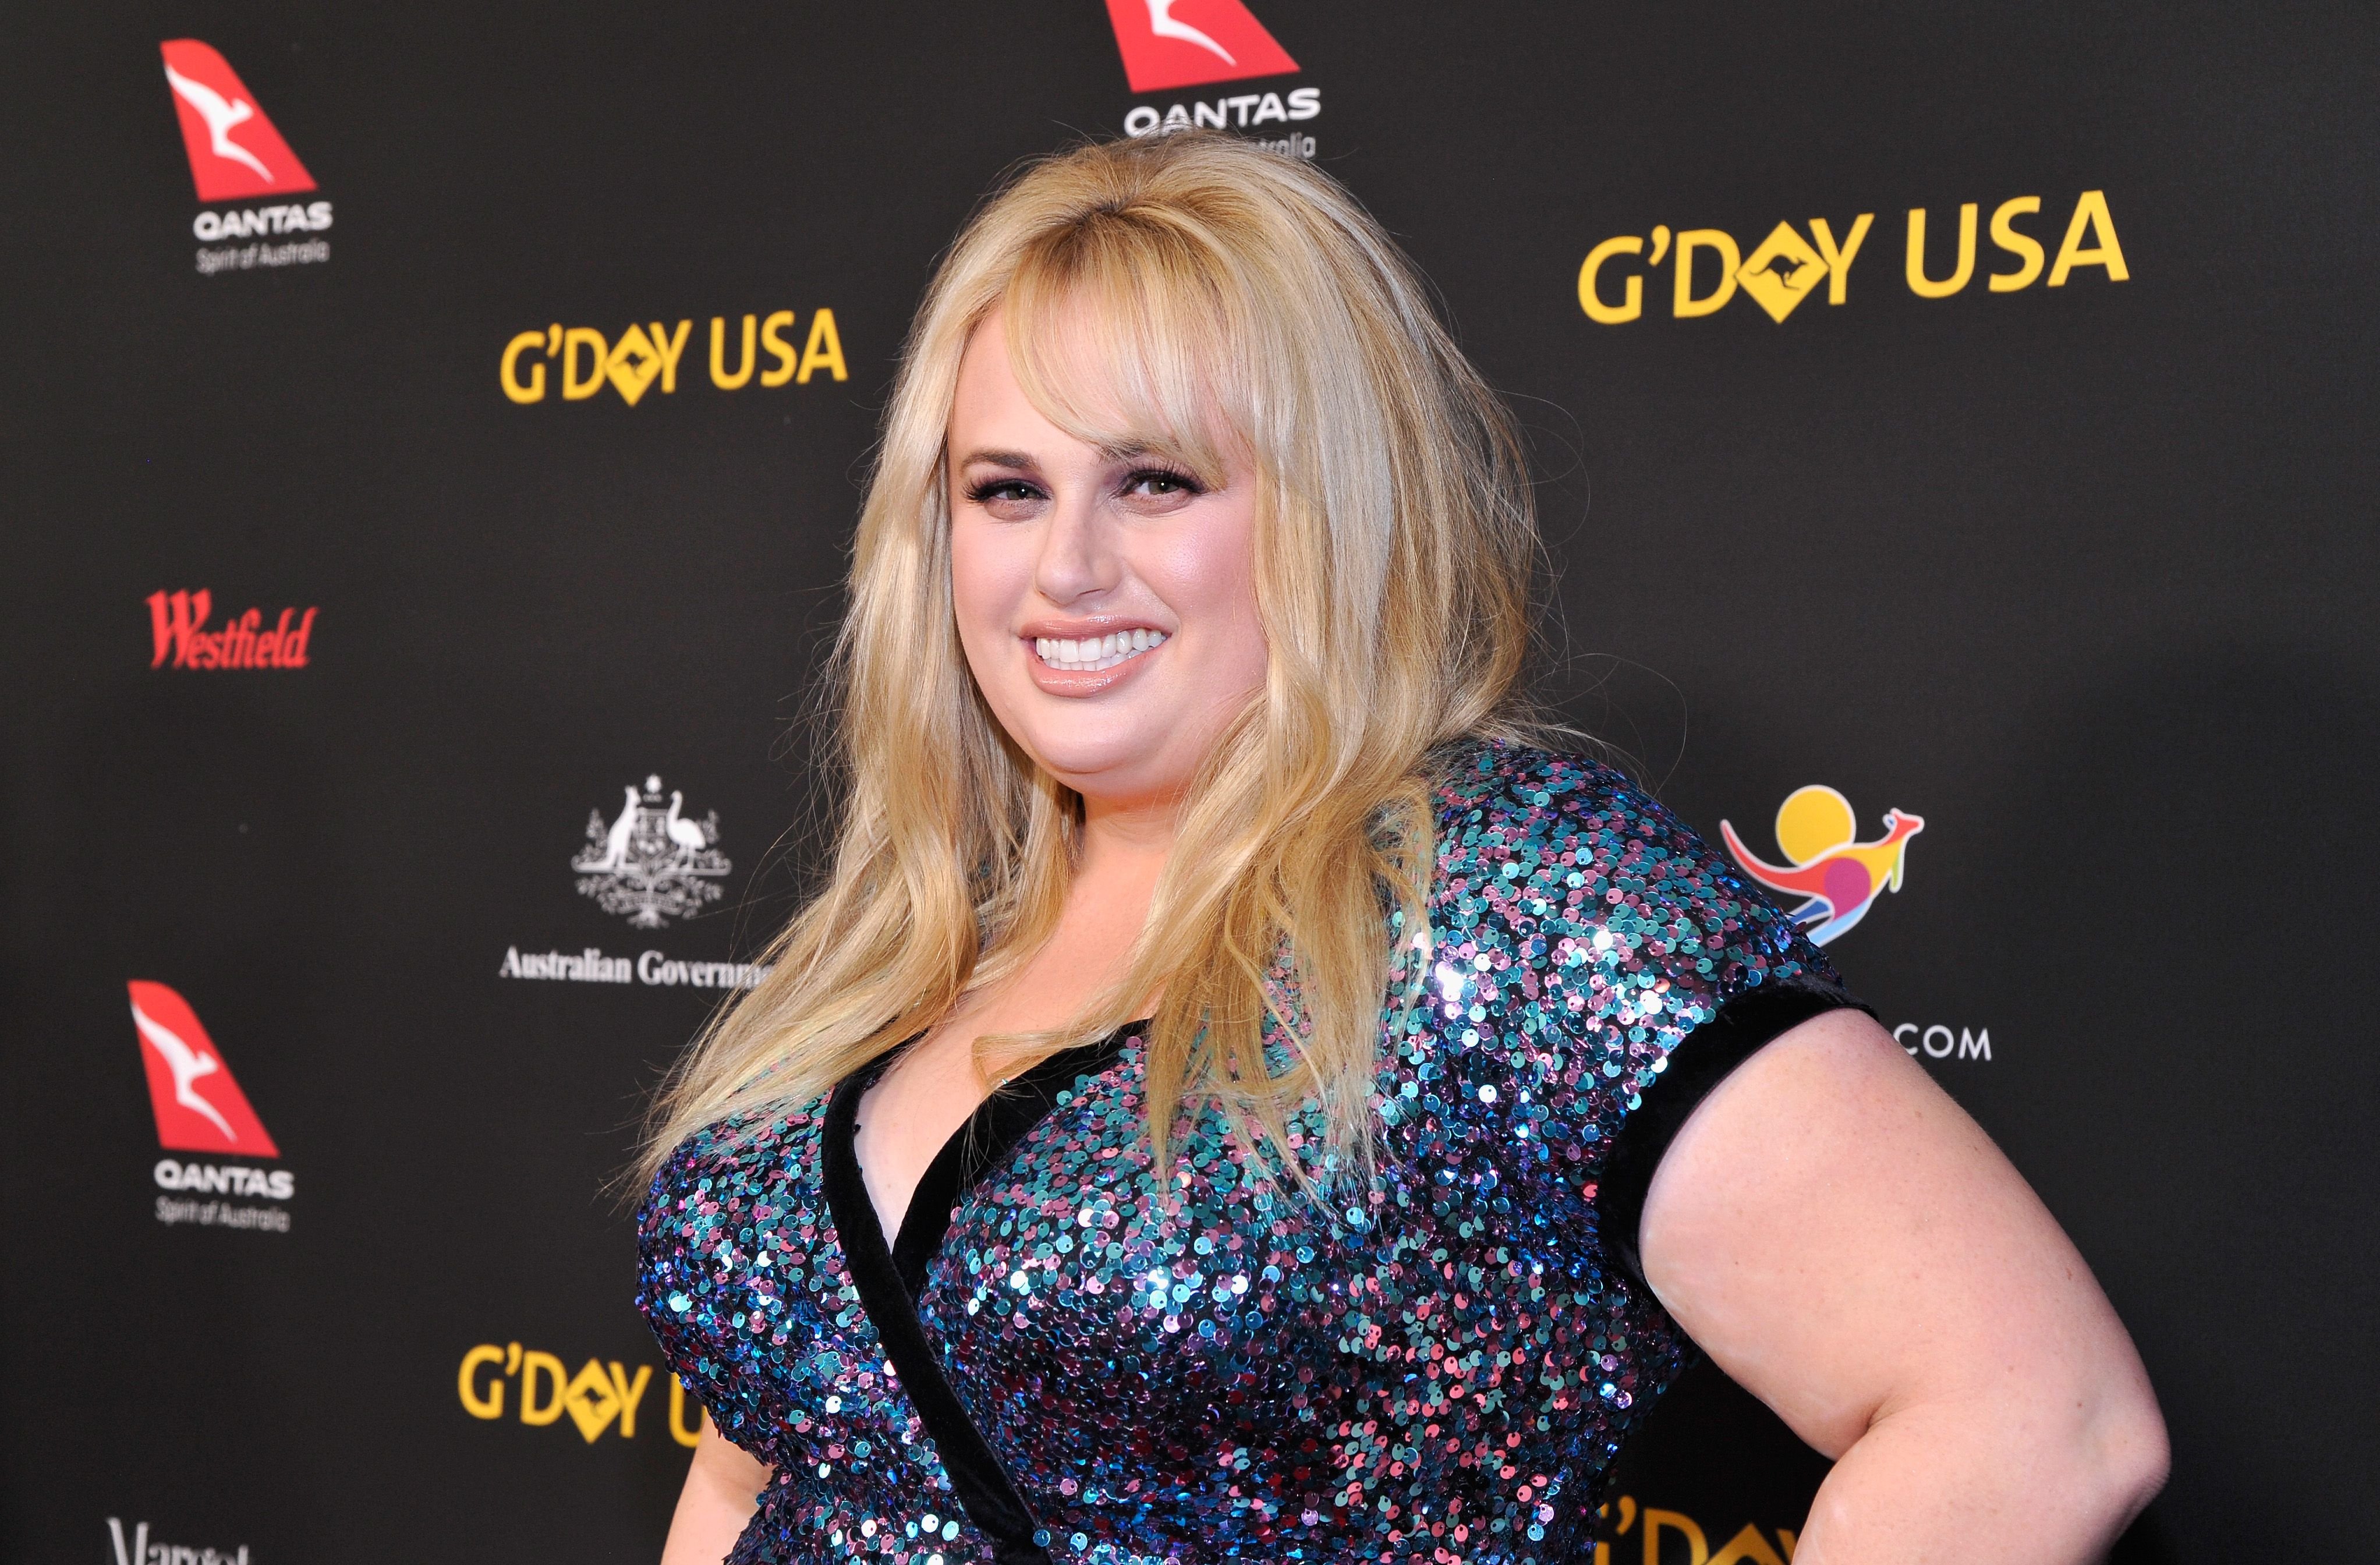 Actor Rebel Wilson attends the 2018 G'Day USA Black Tie Gala at InterContinental Los Angeles Downtown on January 27, 2018 in Los Angeles, California. | Photo: Getty Images